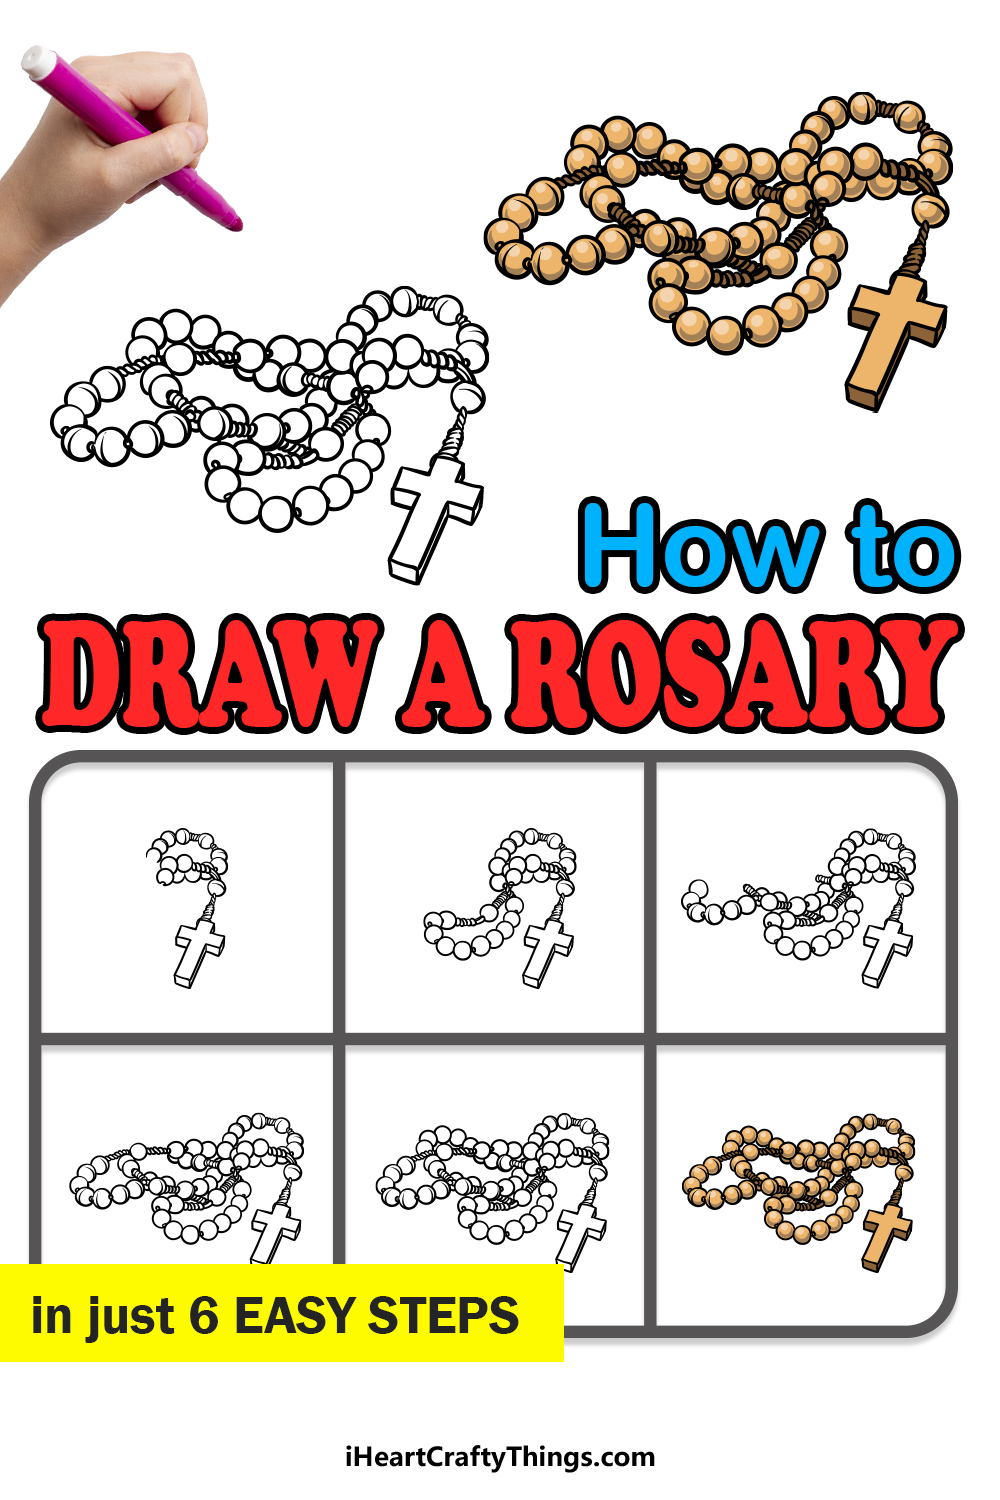 how to draw a rosary in 6 easy steps